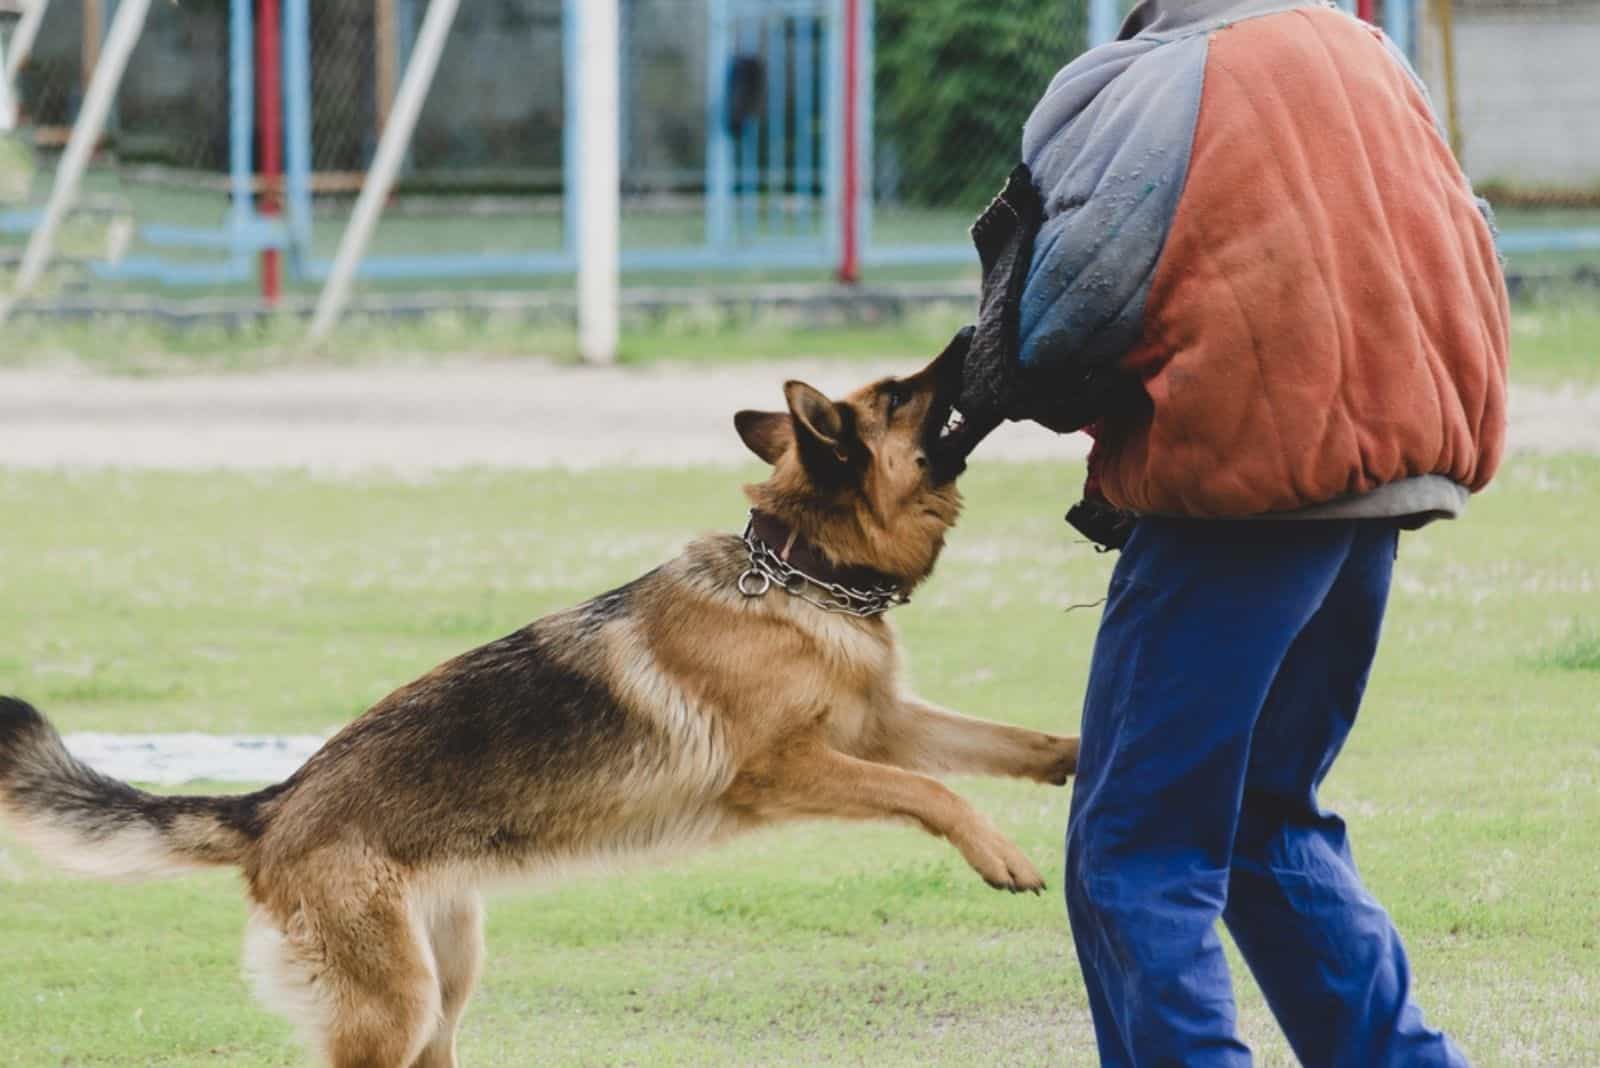 German Shepherd attacks a person in special protective clothing